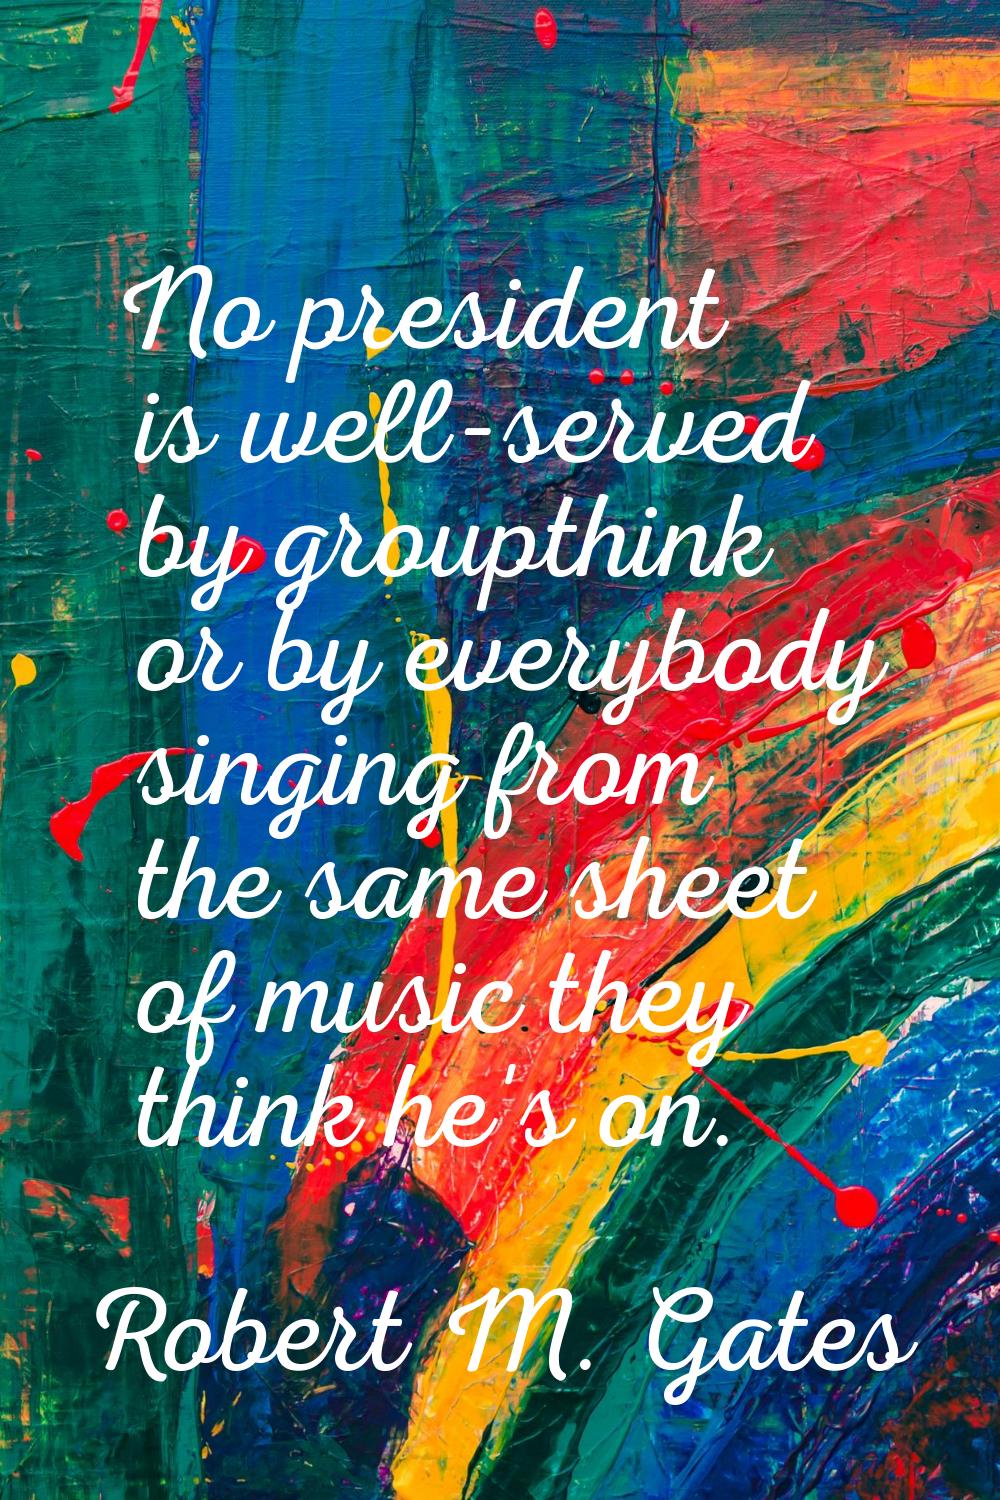 No president is well-served by groupthink or by everybody singing from the same sheet of music they